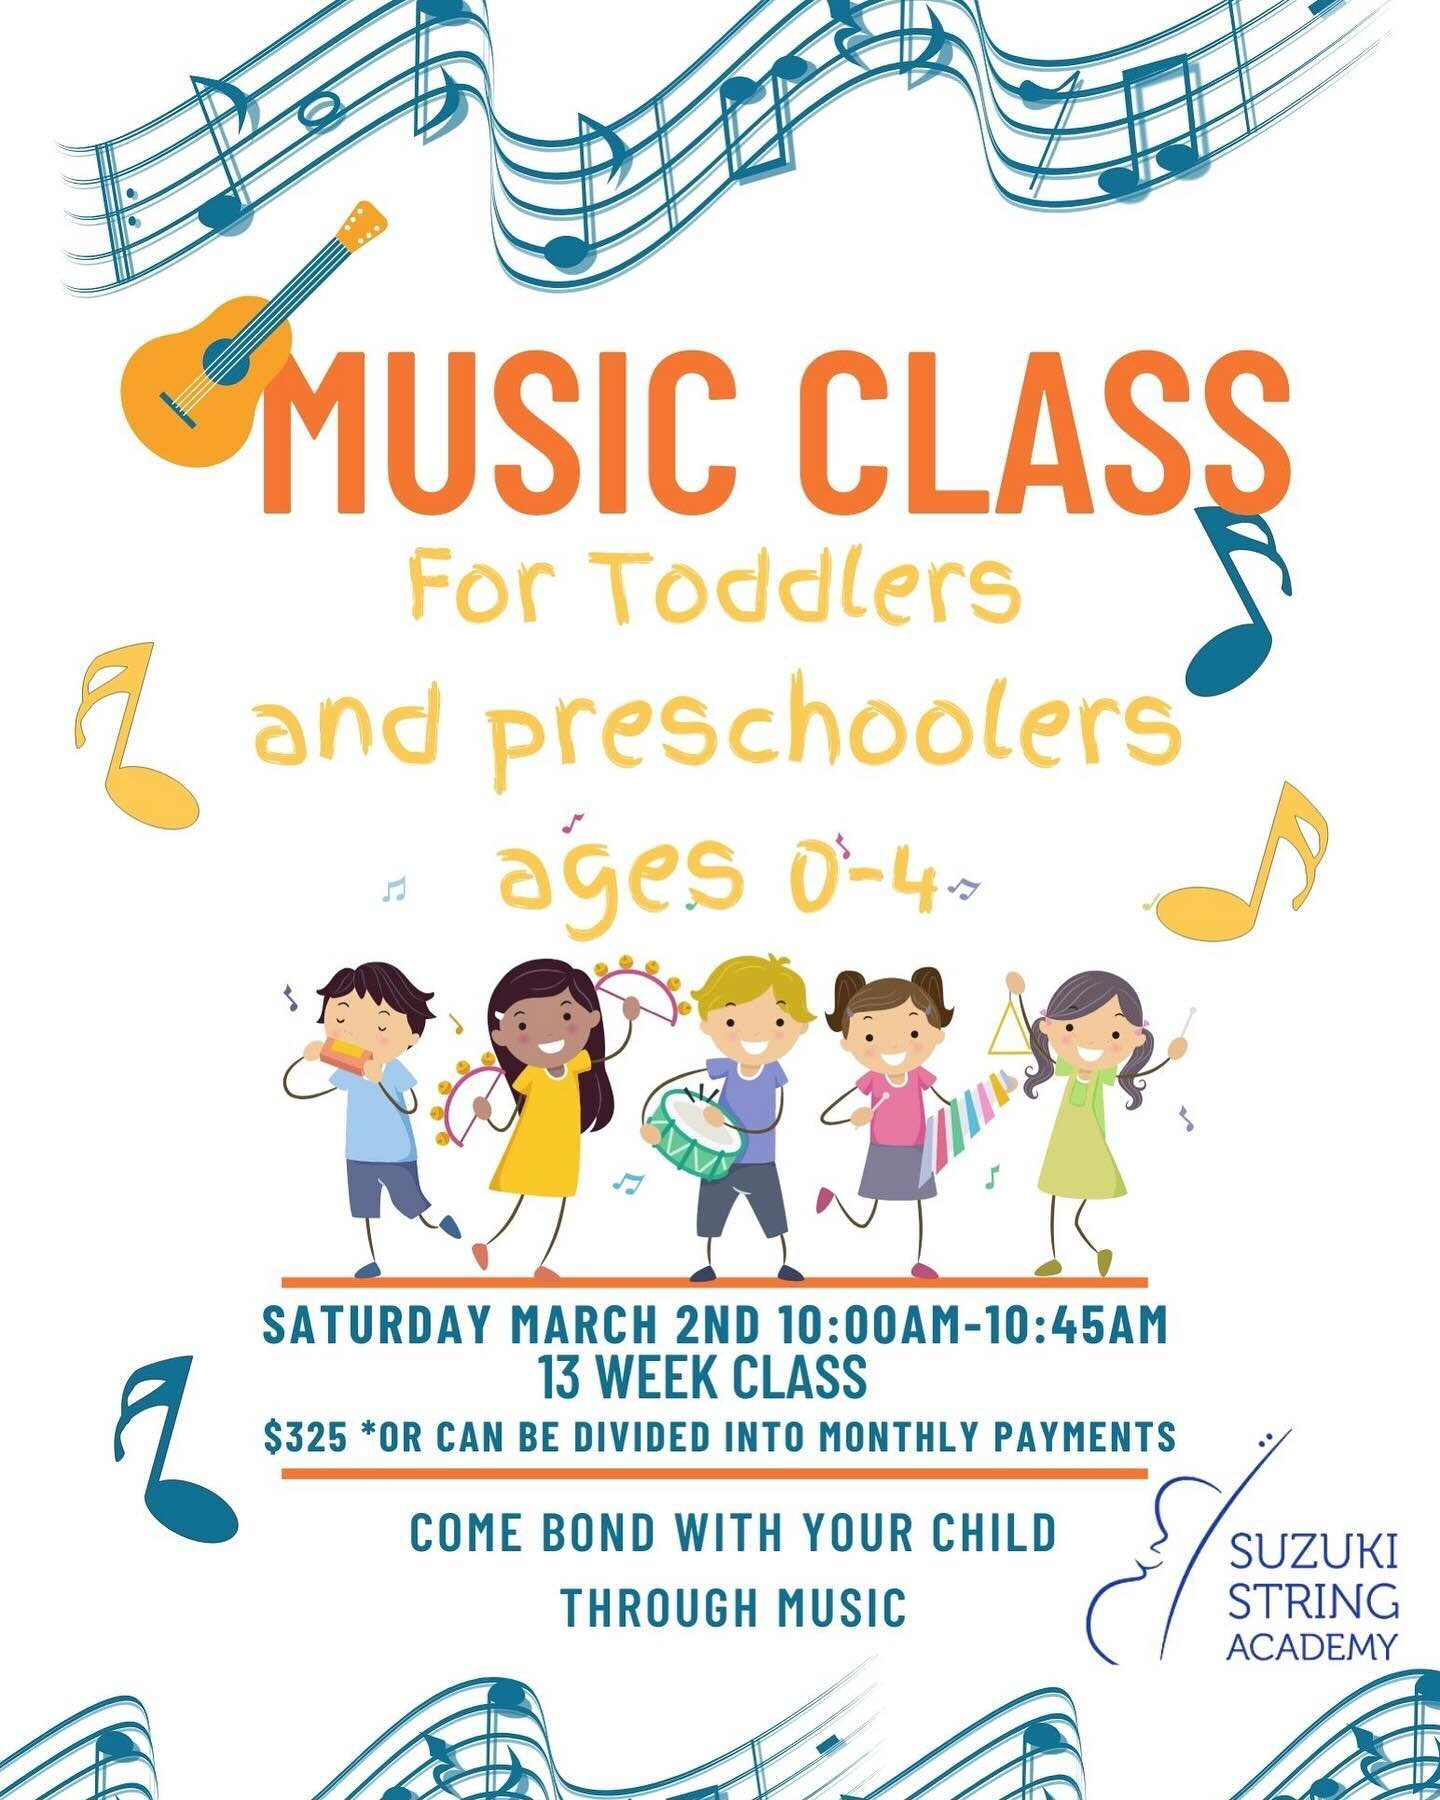 New class starting March 2nd! Toddler and Preschool Music and movement for ages 0-4. 
Come bond with your child through music. Starting music early has so many benefits mentally, physically and socially.

Register today at https://www.suzukistringaca